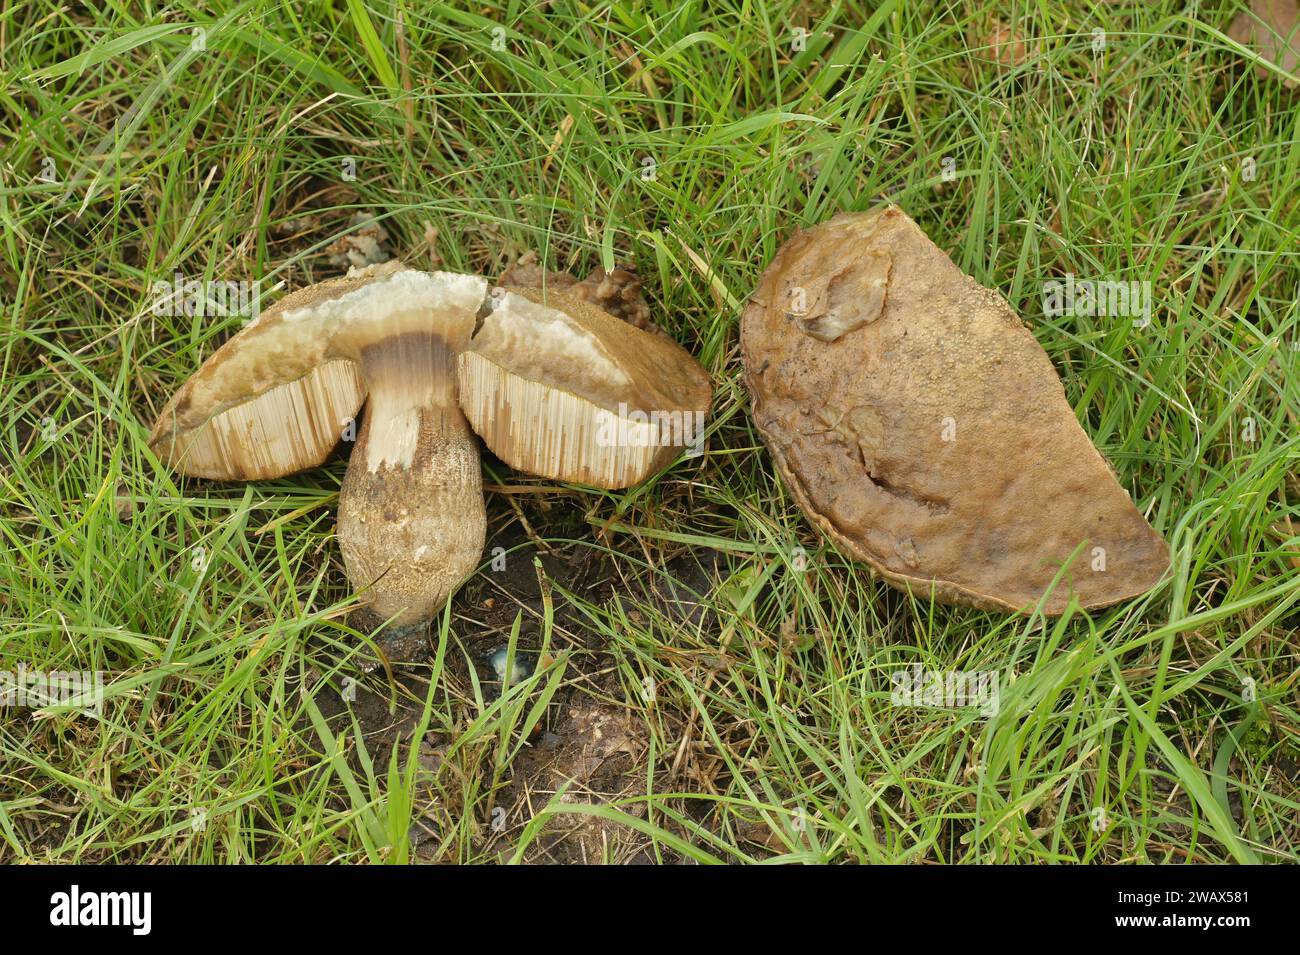 Natural closeup on the Slate Bolete mushroom , Leccinum duriusculum gronwing in the grass Stock Photo